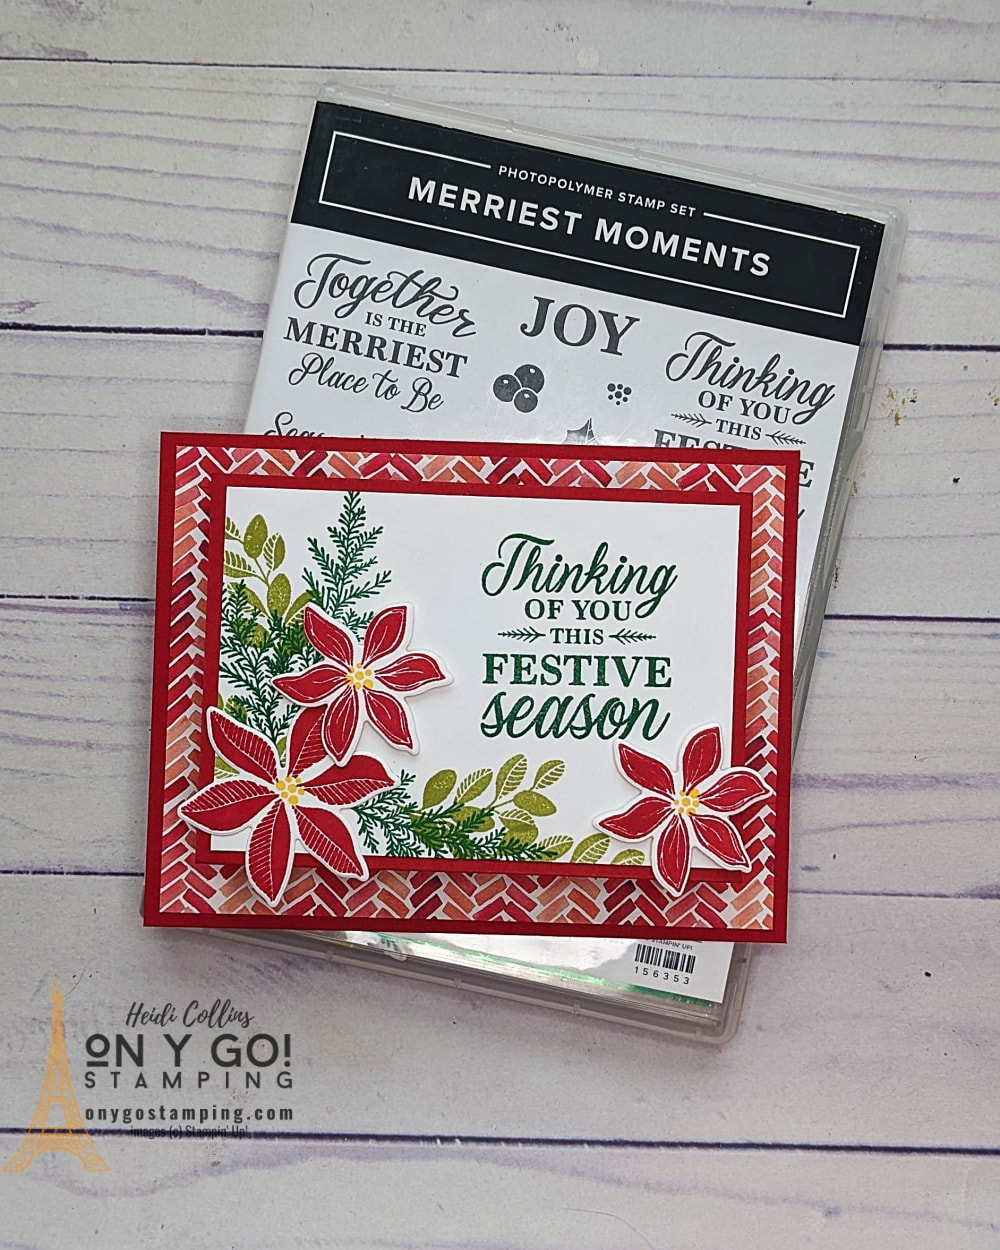 Use the Merriest Moments stamp set and Painted Christmas patterned paper from Stampin' Up!® to create a quick and easy fun fold card that also holds a gift card!